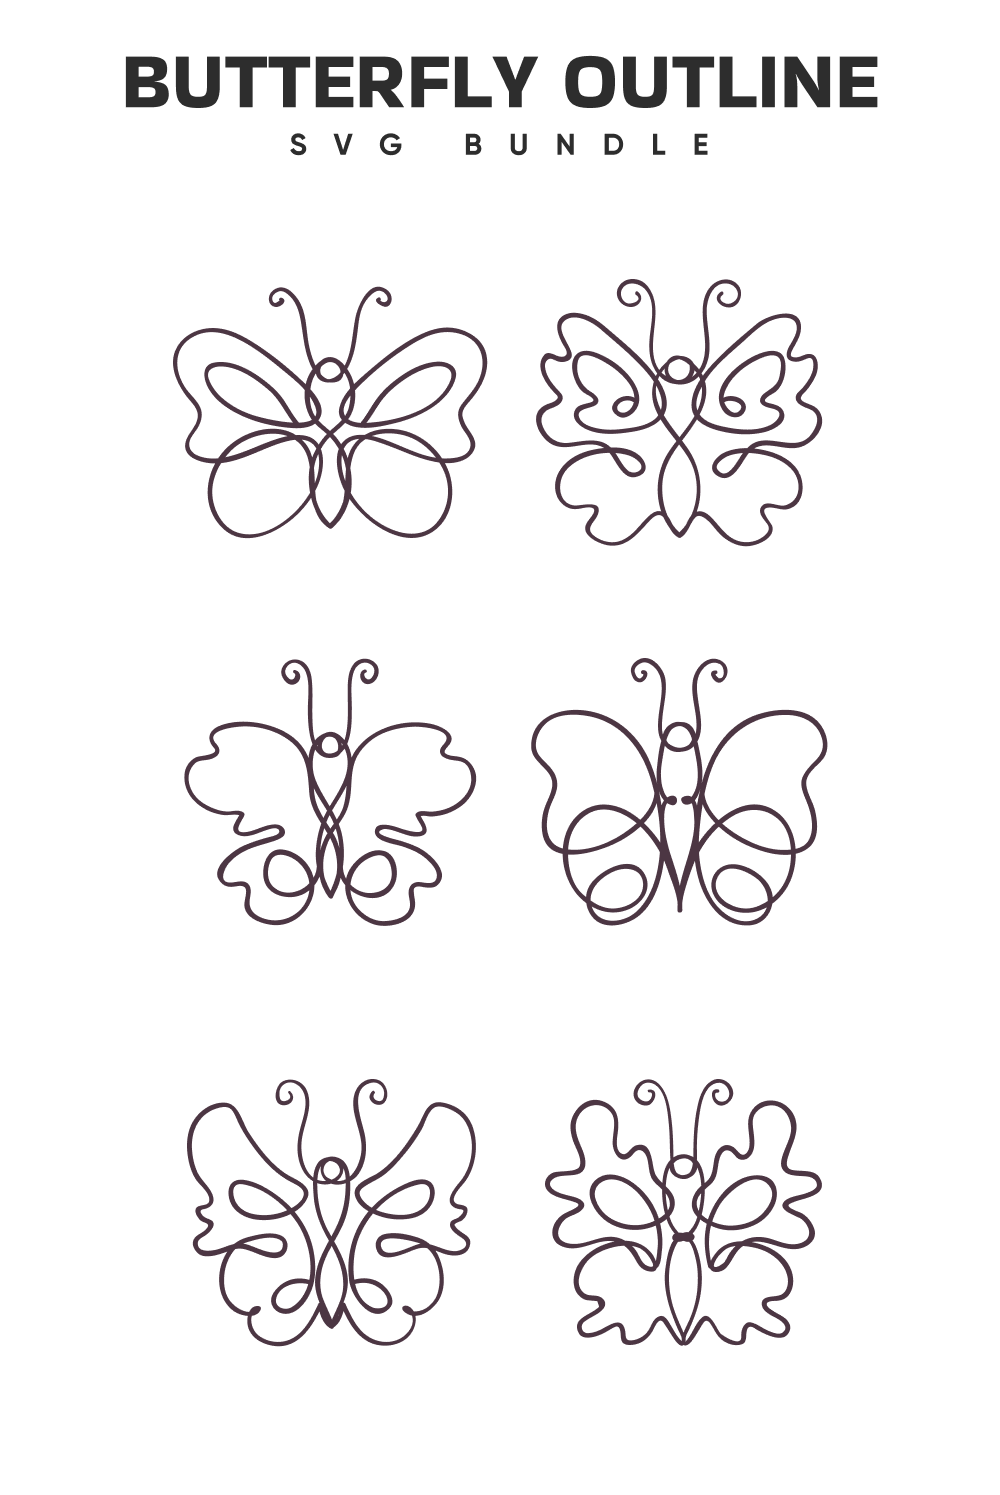 The butterfly outlines are shown in black and white.